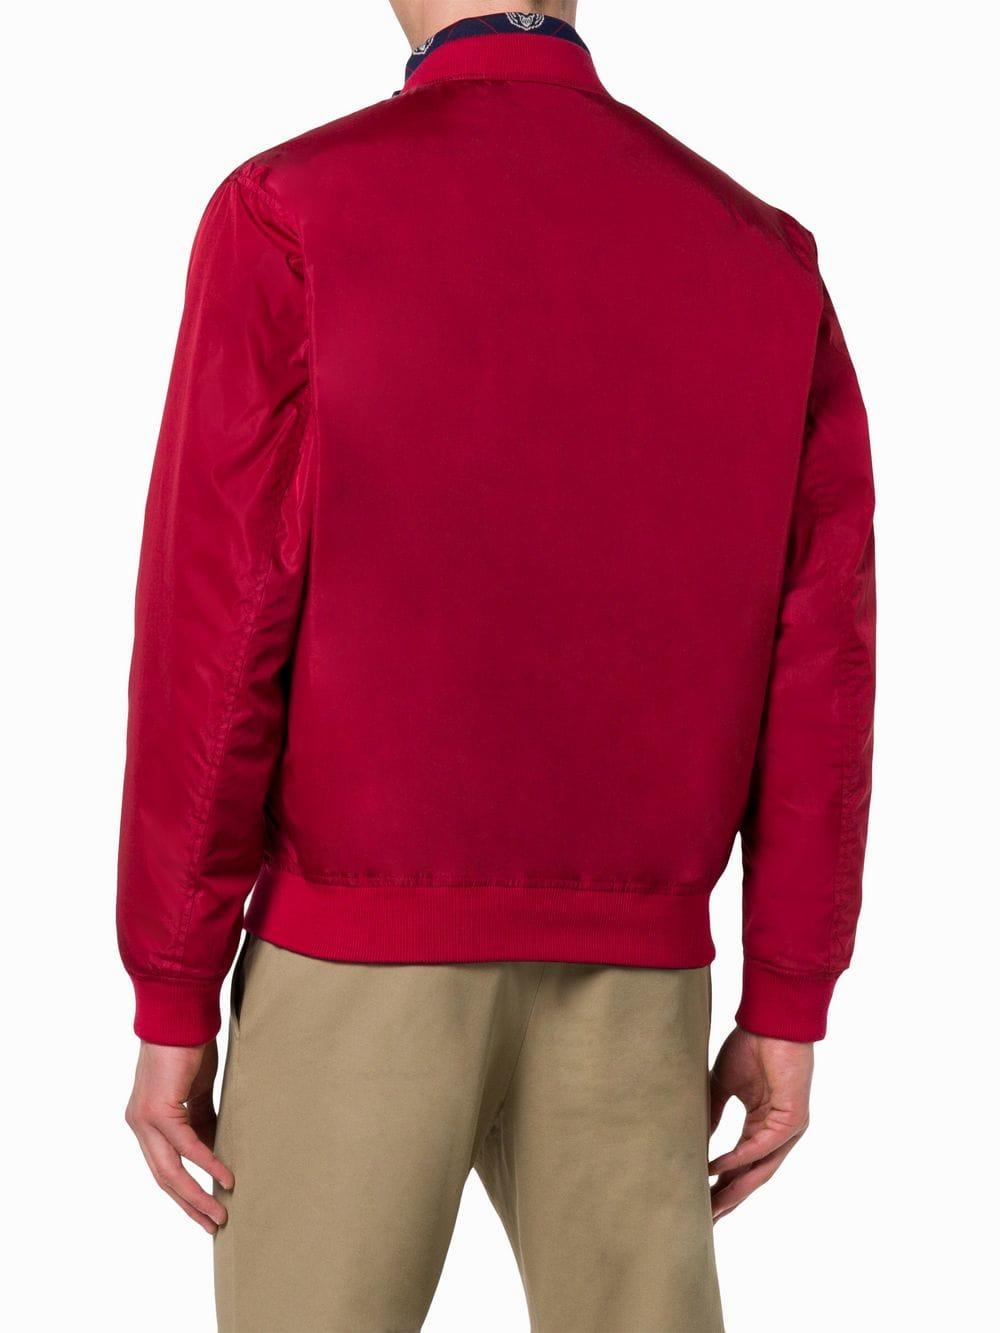 Gucci Reversible Logo Bomber Jacket in Red for Men - Lyst